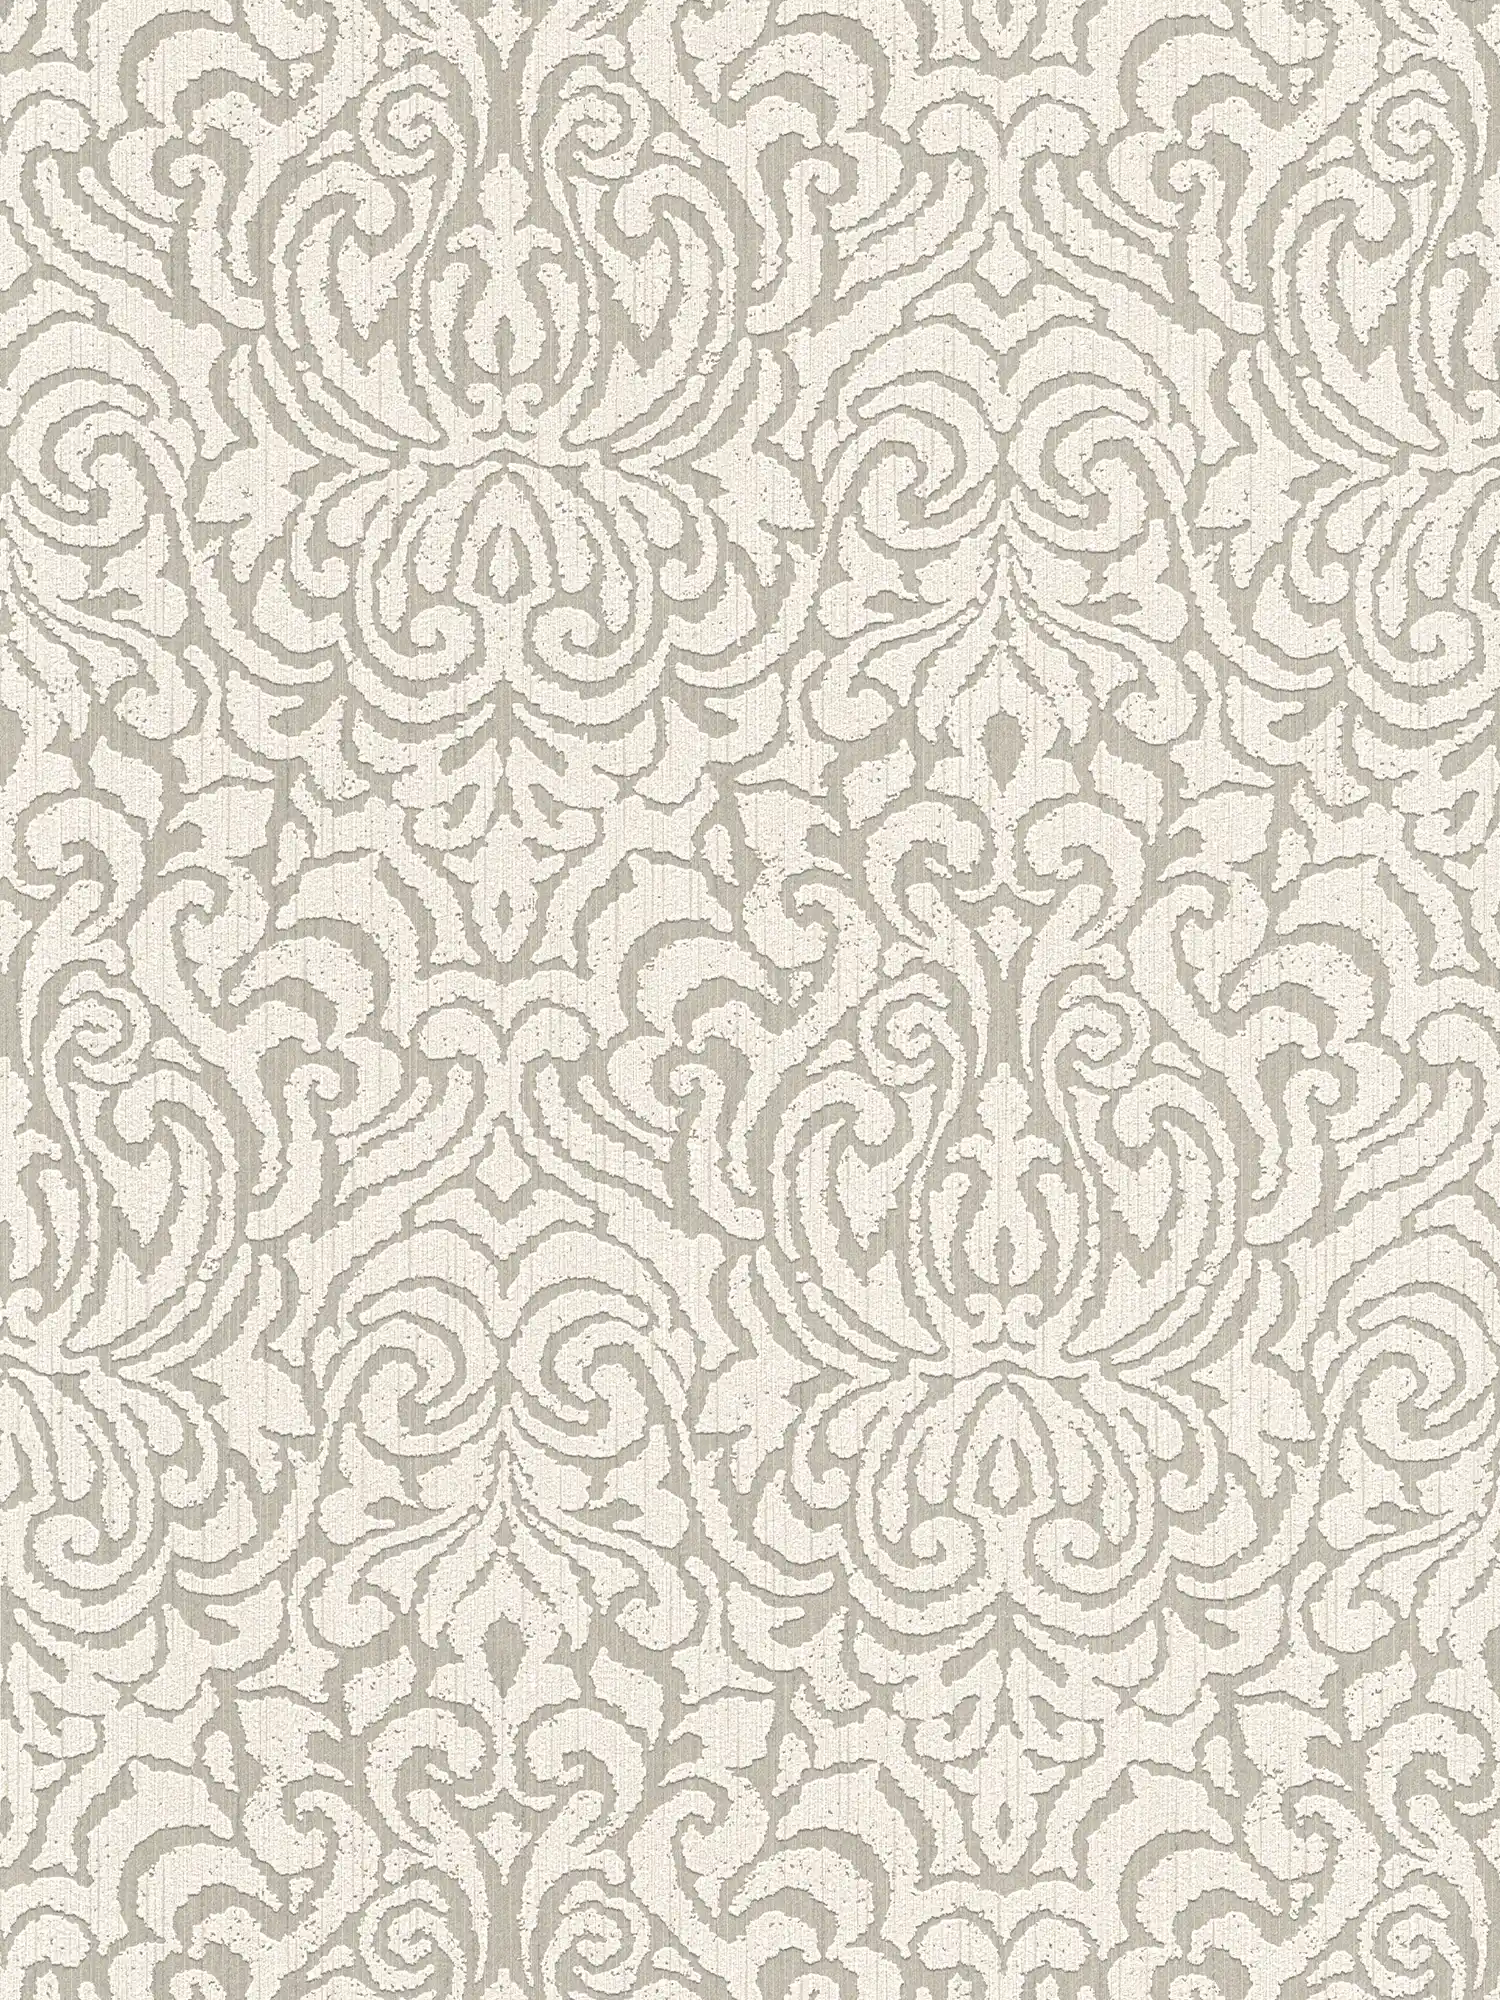 Ornament wallpaper baroque in used look Shabby Chic - beige, cream
